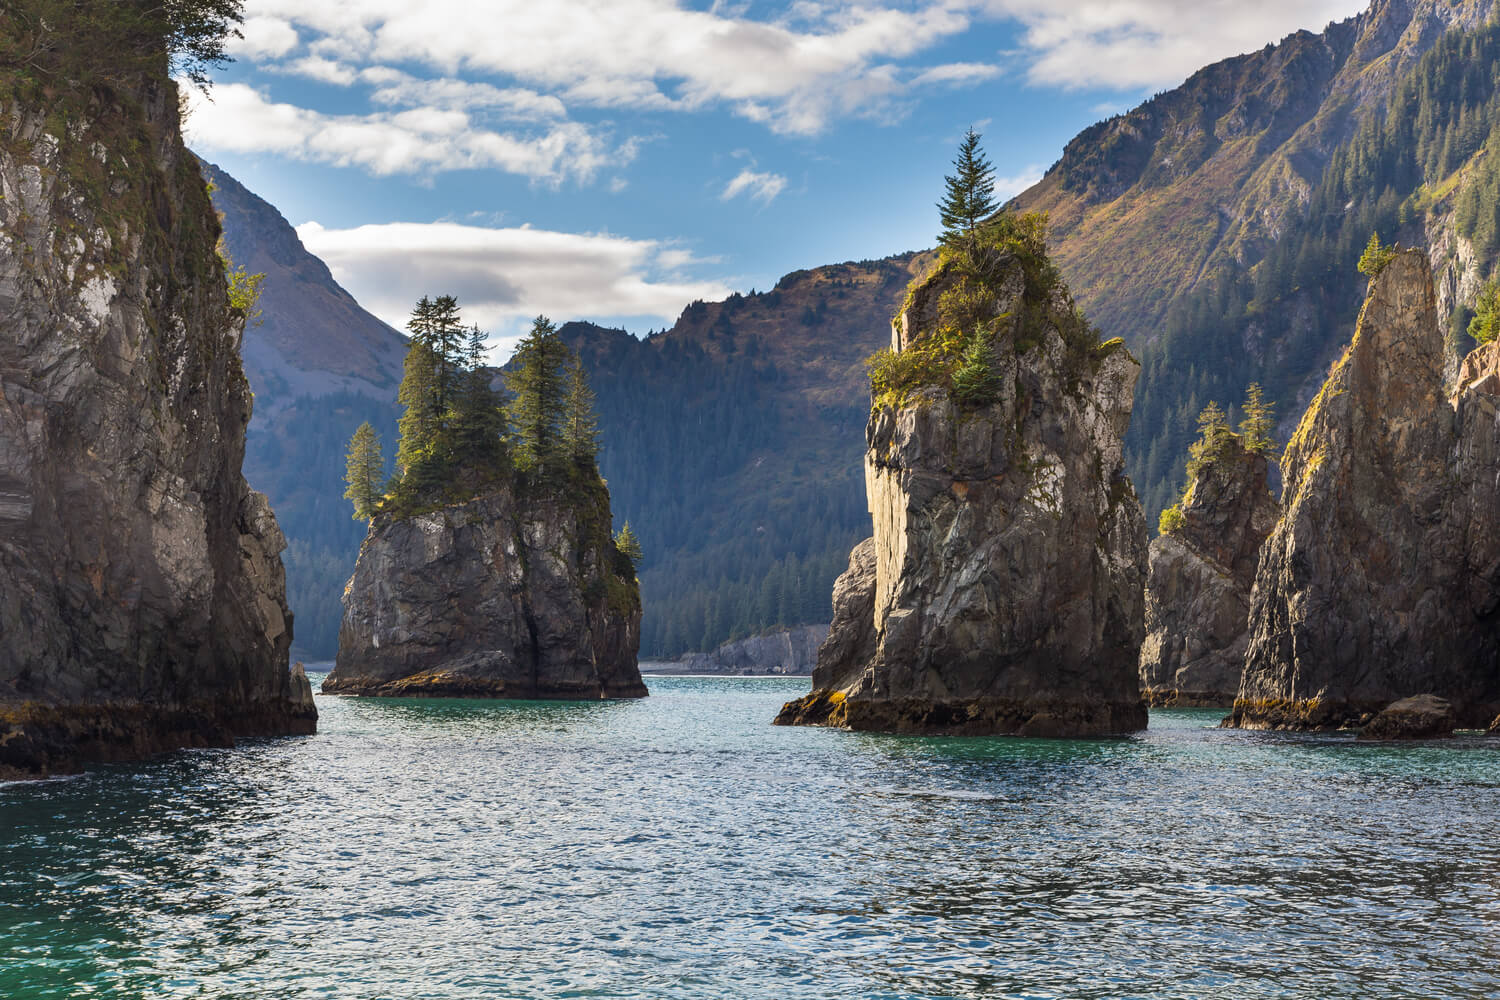 Rock spires emerge from an inlet.